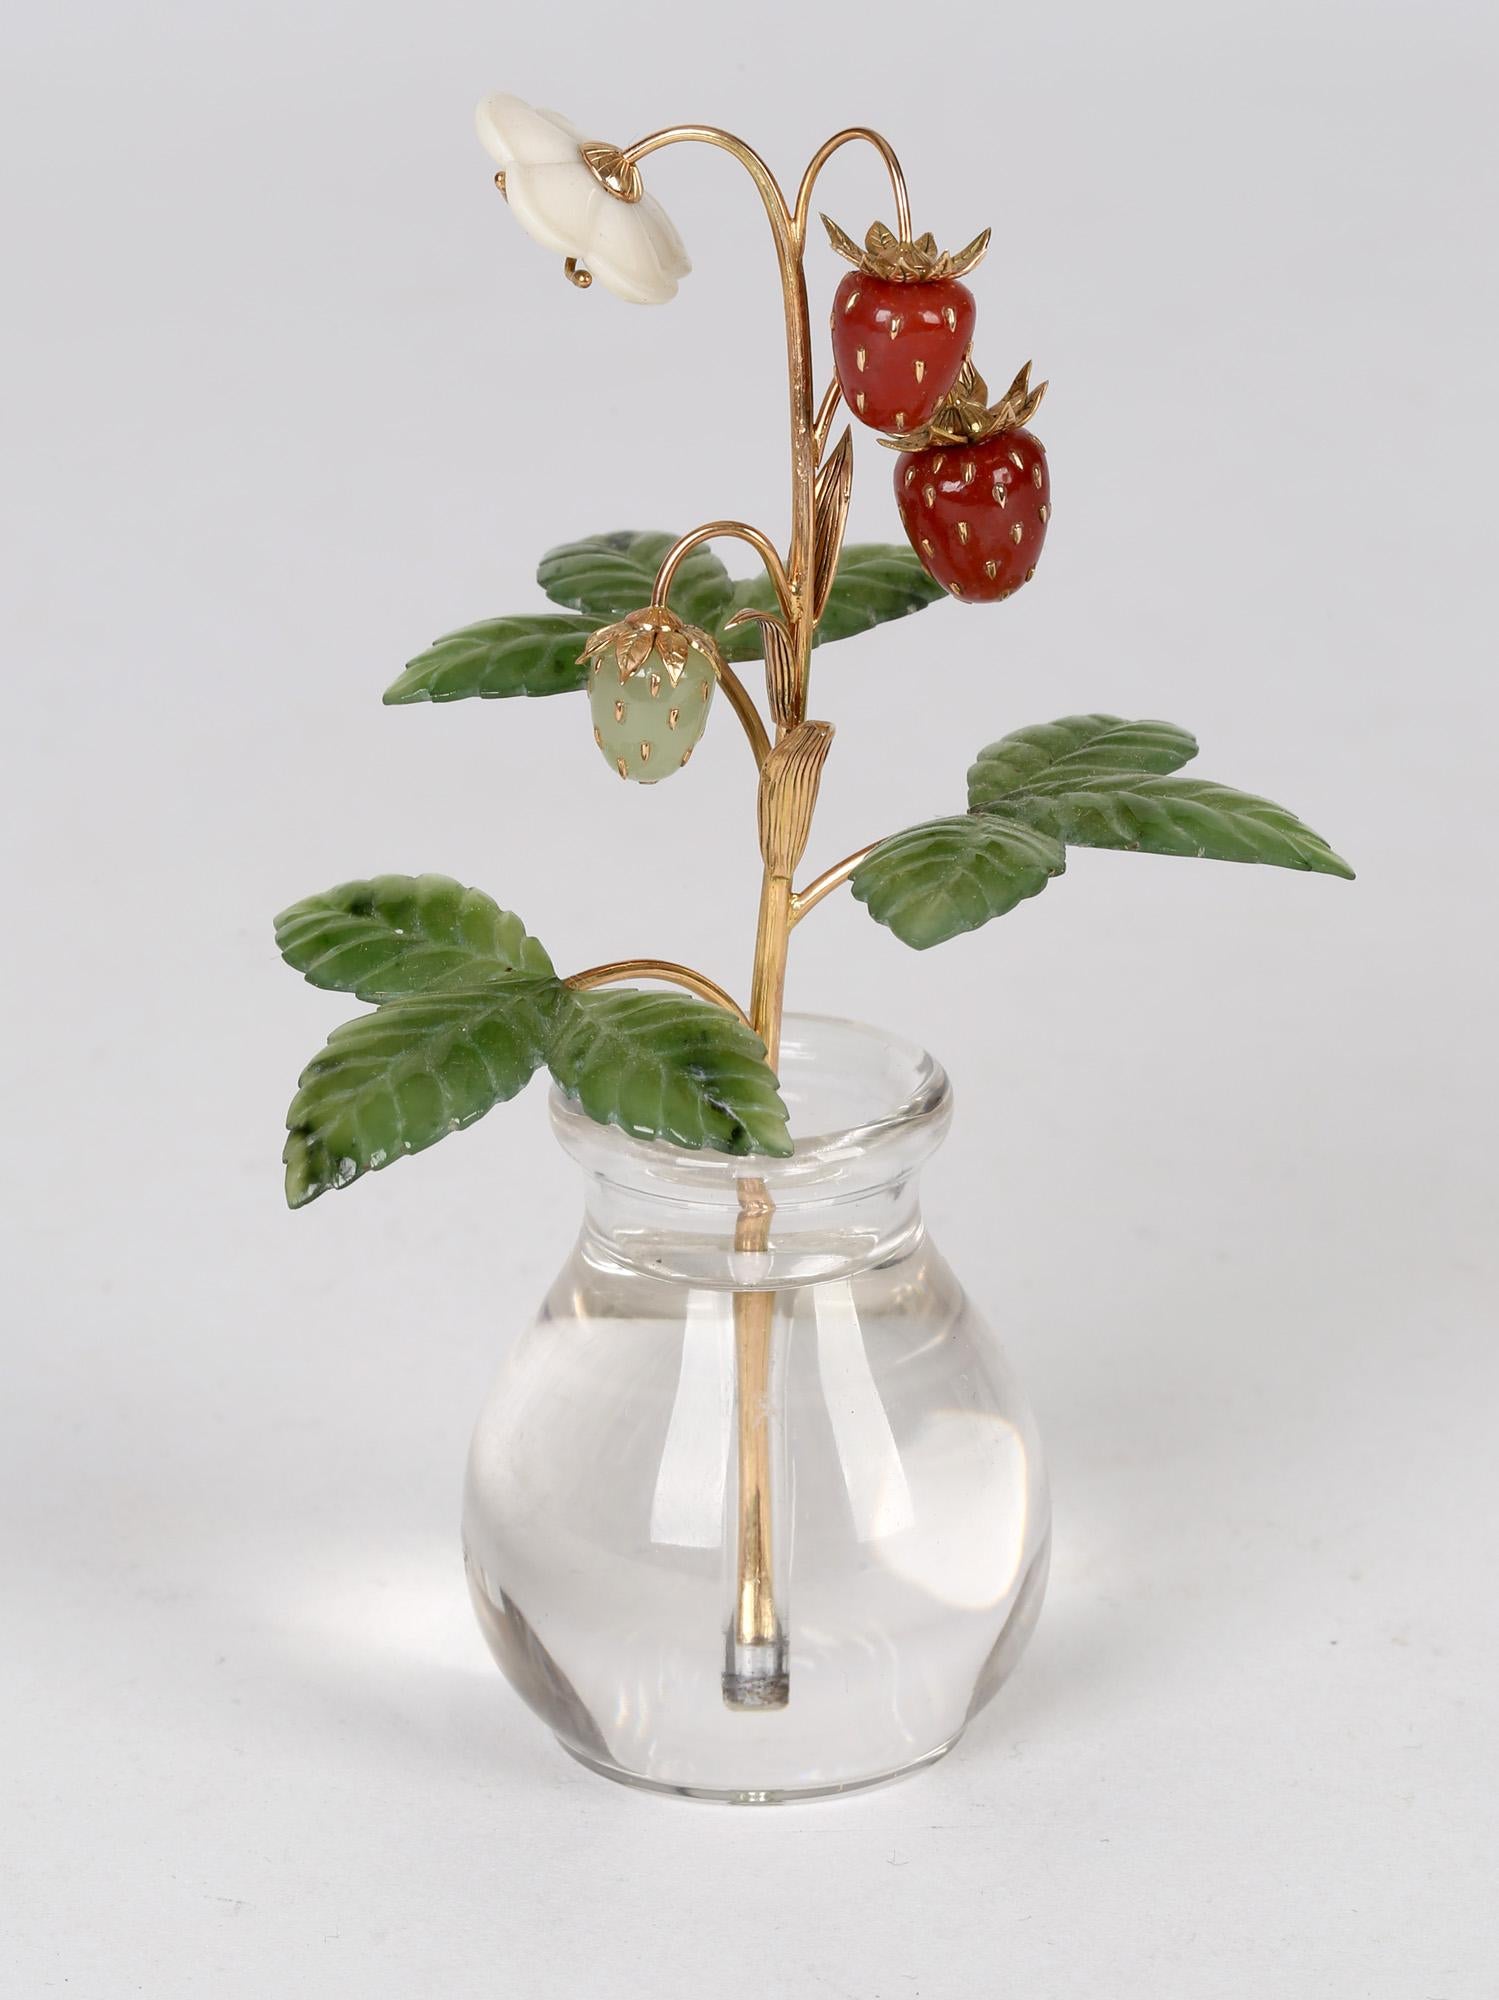 Fabergé Style Exquisite Wild Strawberry Stem with Crystal Vase 1